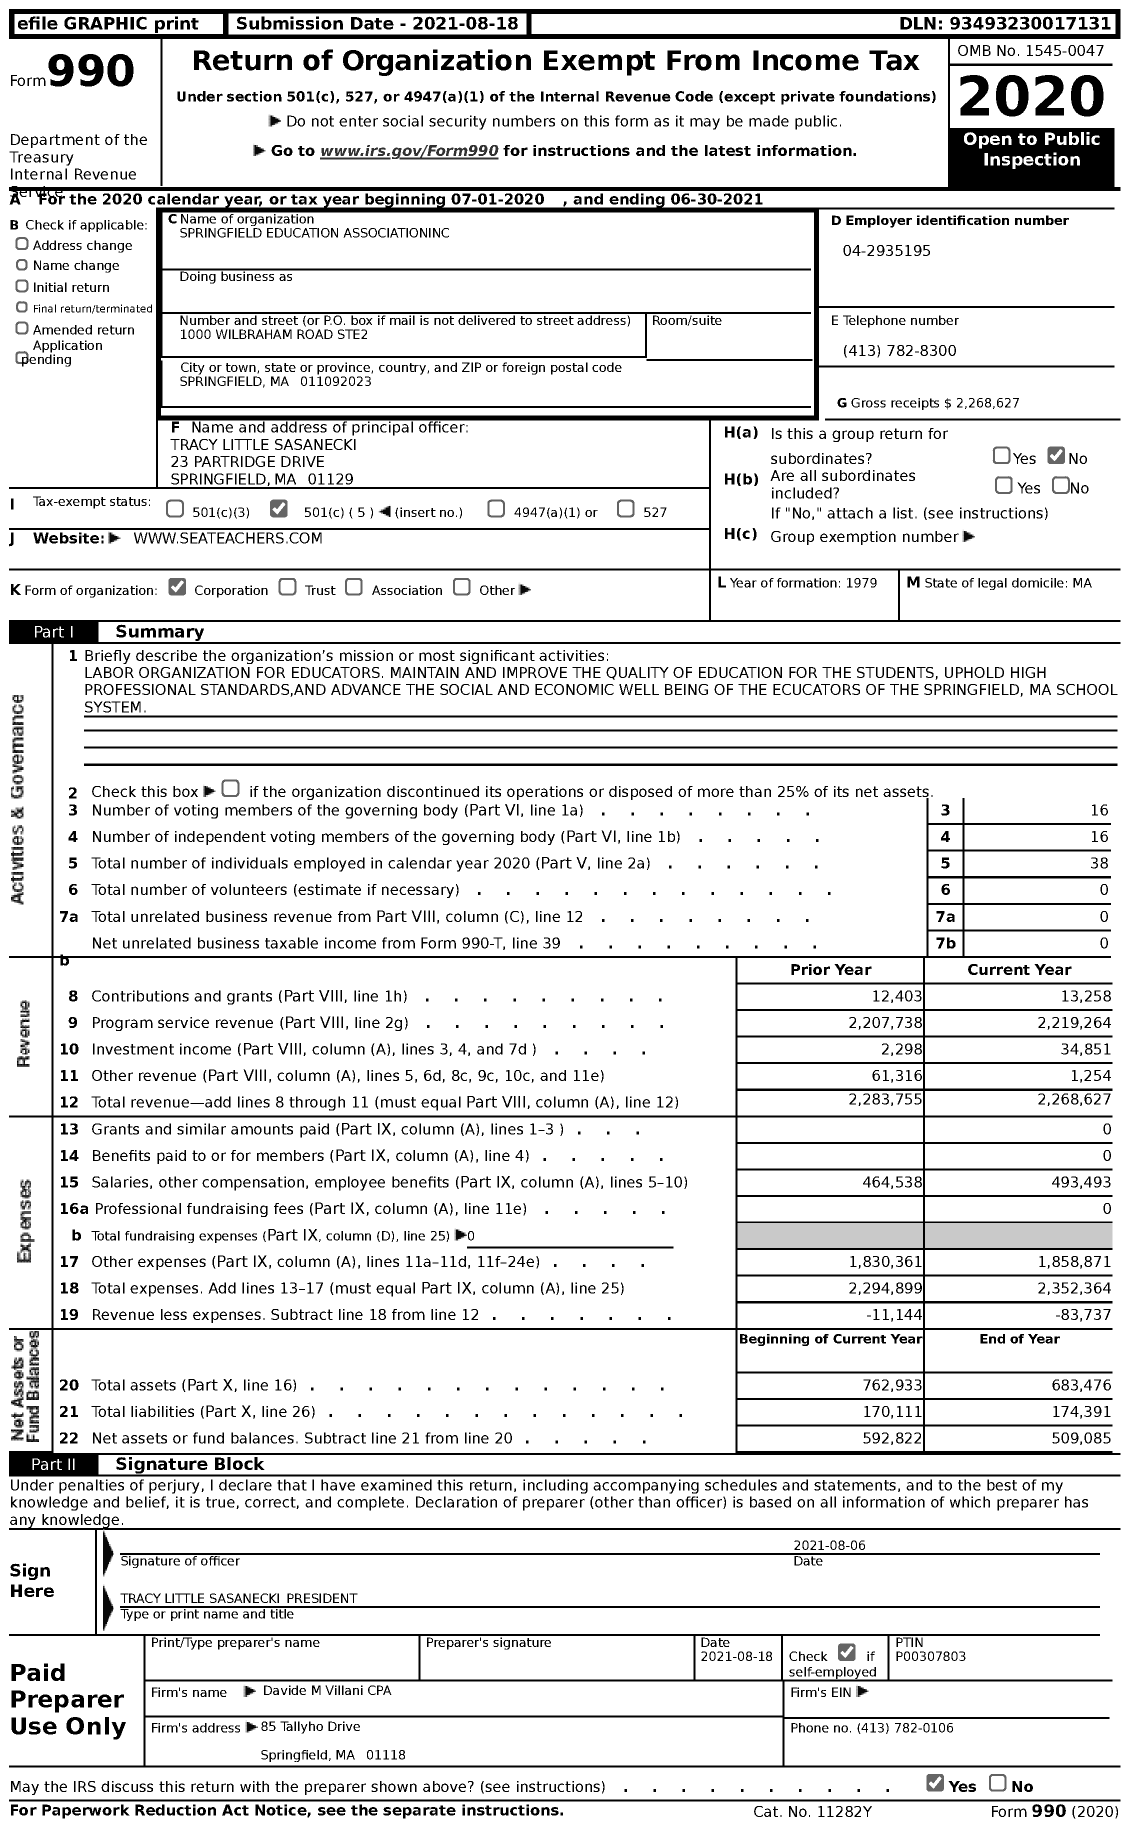 Image of first page of 2020 Form 990 for Massachusetts Teachers Association - 325 Springfield Education Assn